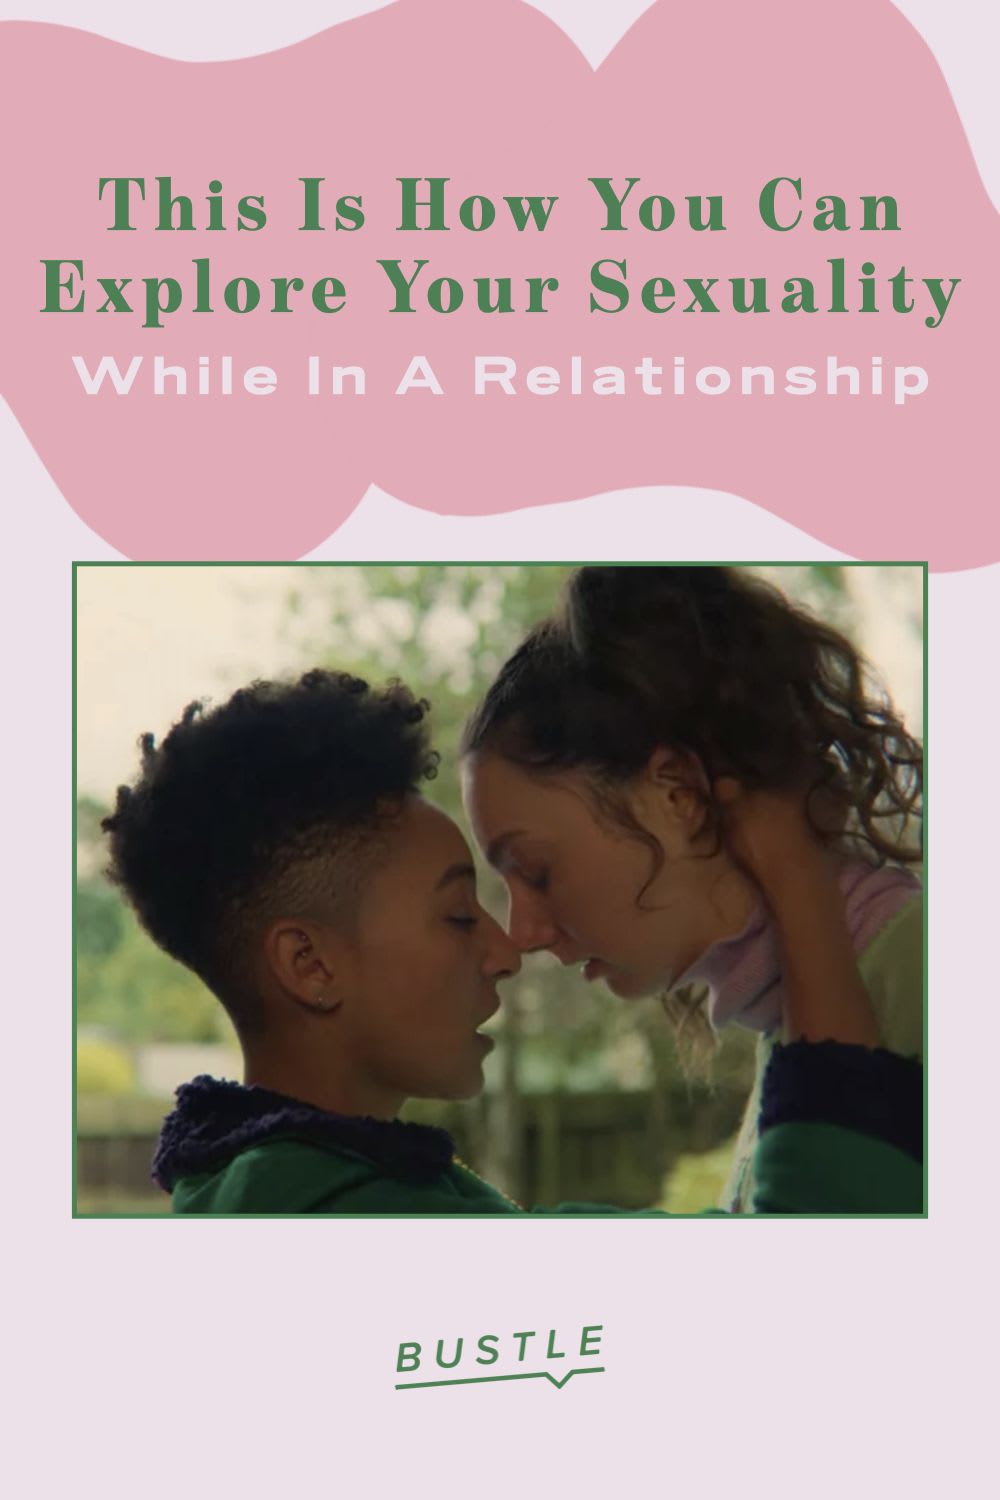 This Is How You Can Explore Your Sexuality While In A Relationship